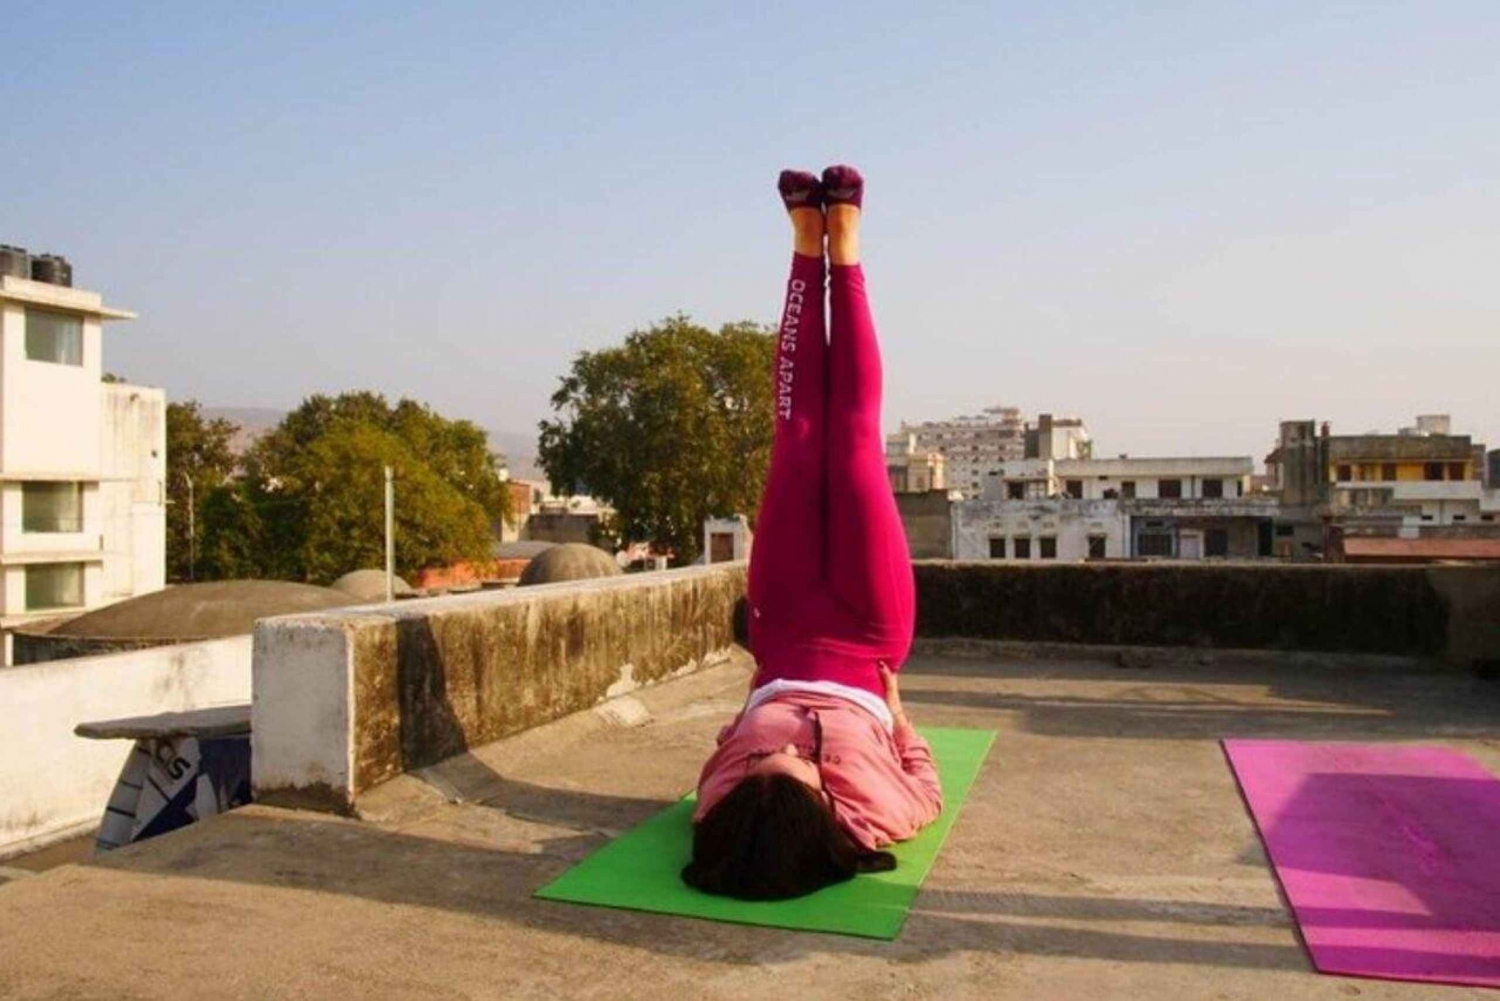 Yoga With Breakfast/Dinner in jaipur With local family